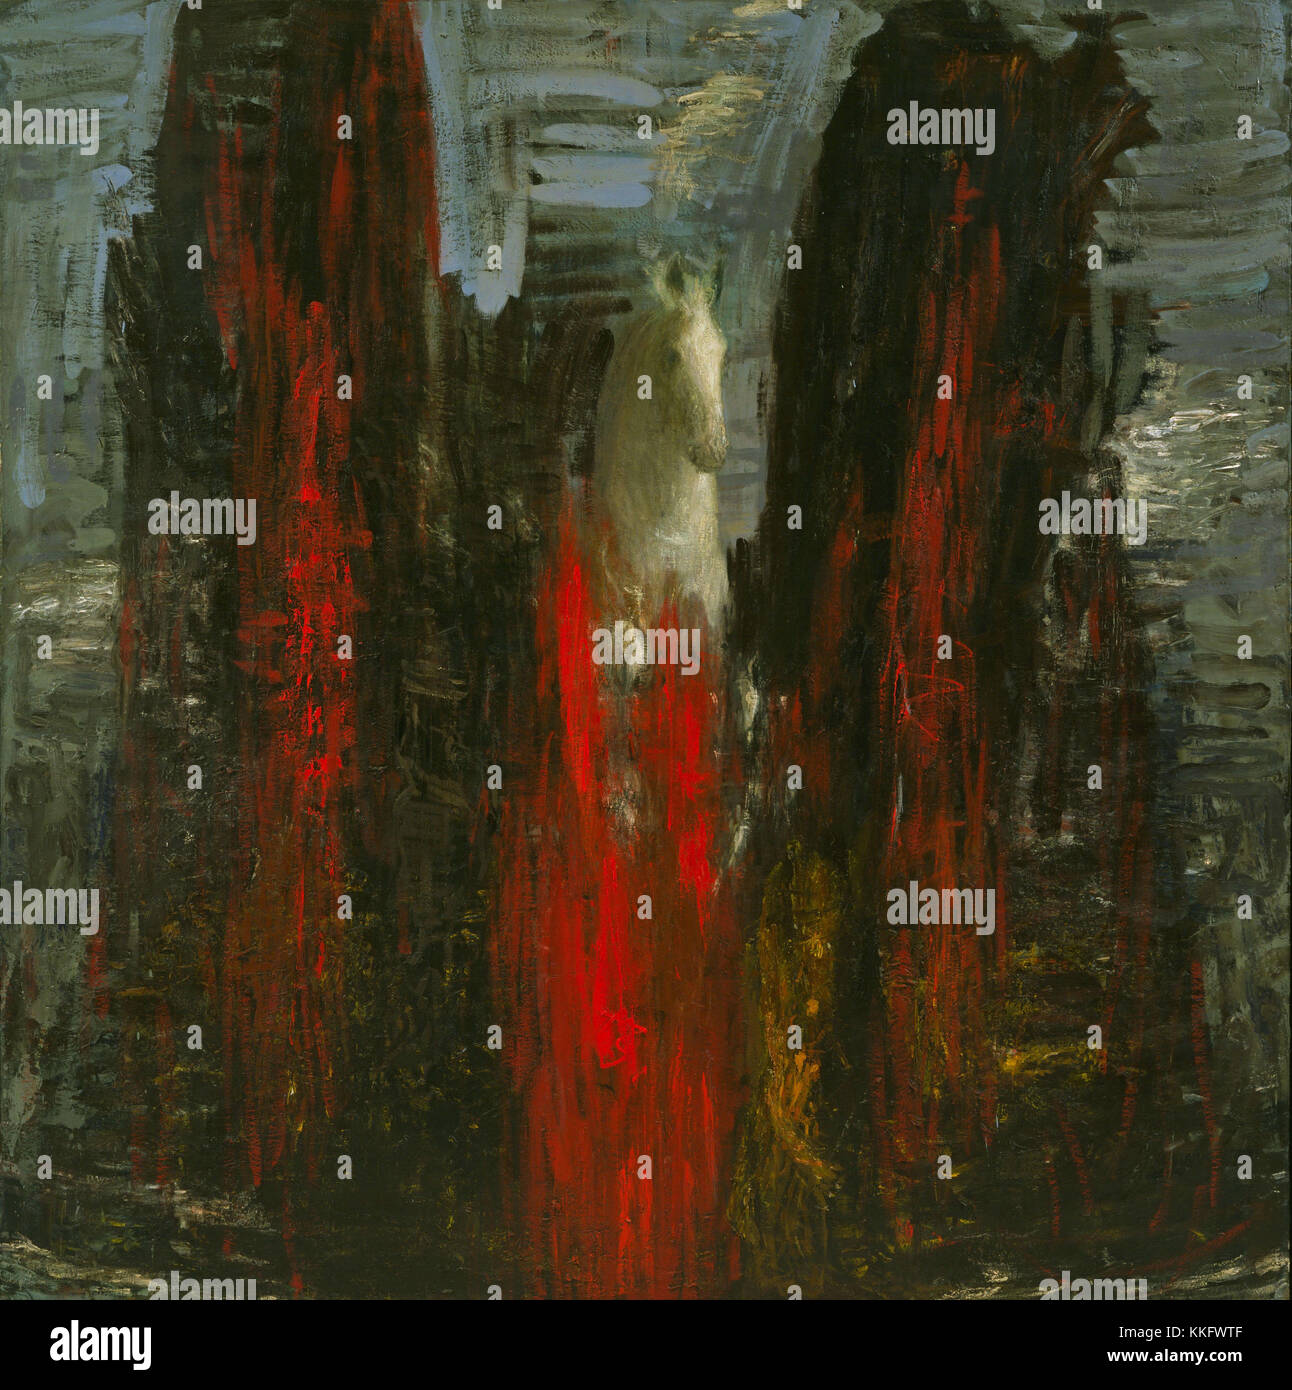 Christopher Le Brun. (British, born 1951). Prow. 1983. Oil on canvas, 8' 6' x 8' 6' (259.1 x 259.1 cm). Gift of UBS. © 2008 Christopher Le Brun / Artists Rights Society (ARS), New York / DACS, London Stock Photo